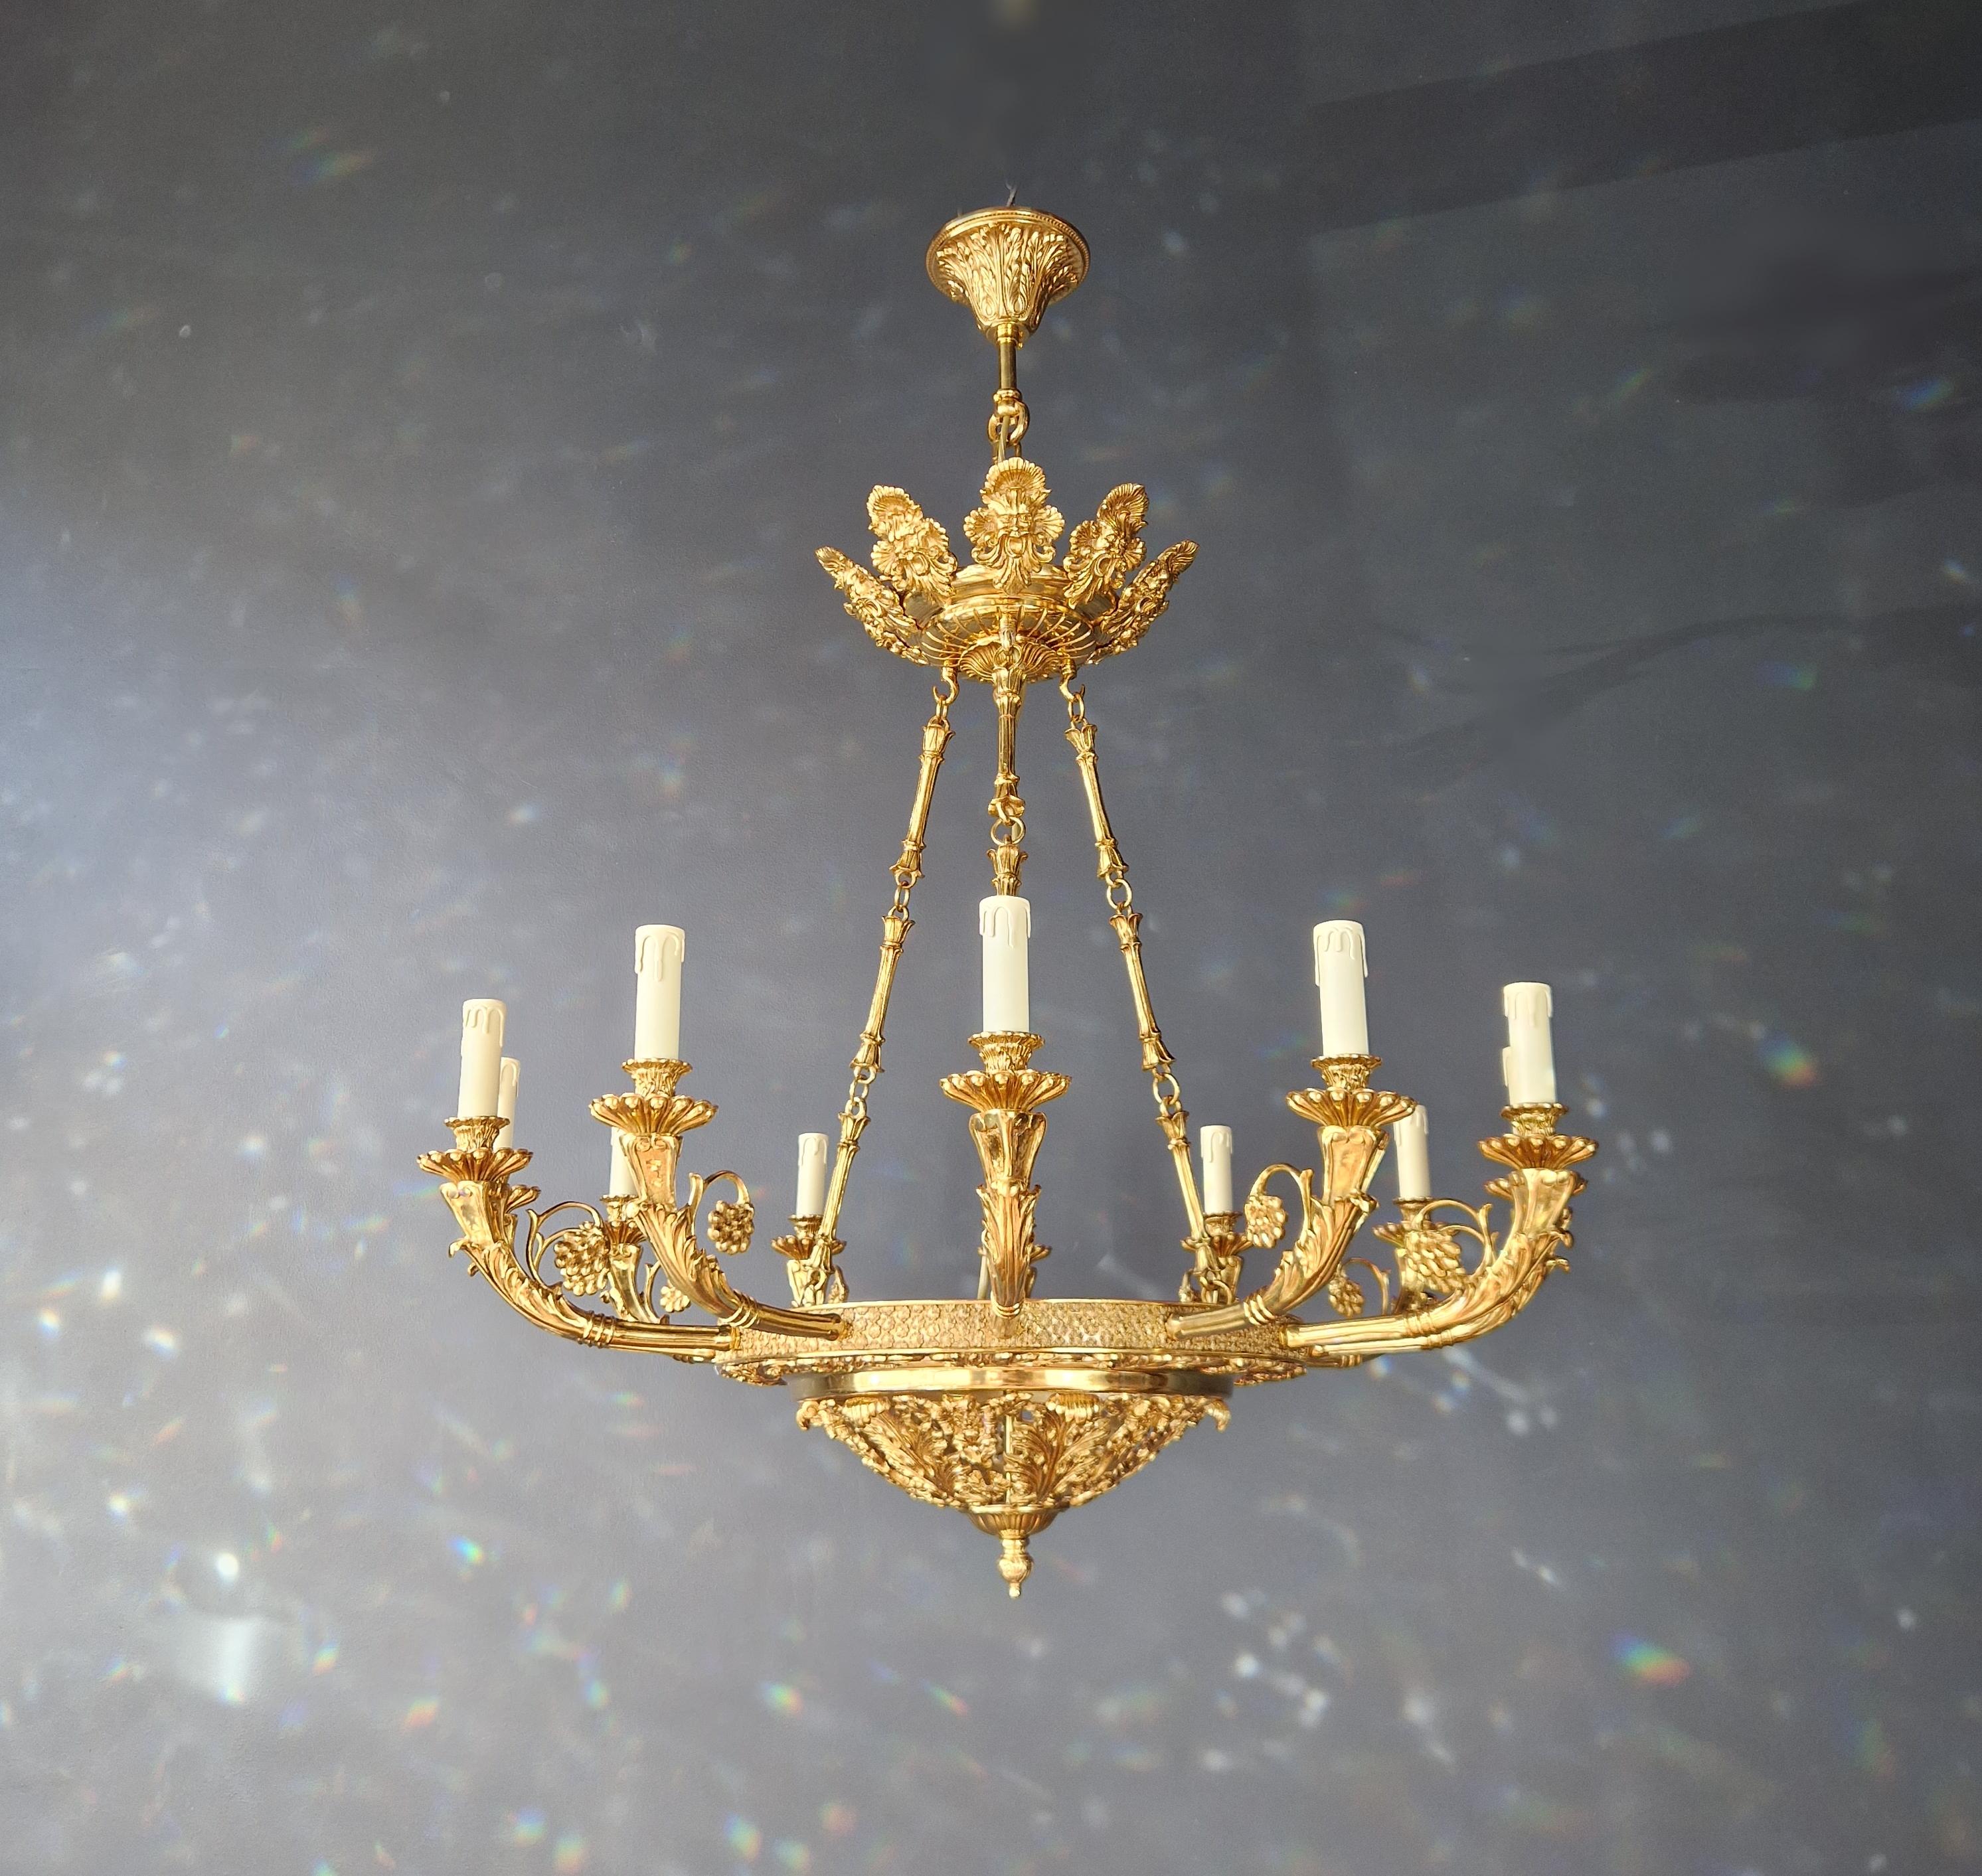 Introducing a stunning Brass Baroque Empire  Chandelier, an exquisite piece adorned with captivating, reminiscent of the classical style of the Empire era. This is a new reproduction, and several are available, ensuring you can bring this classic